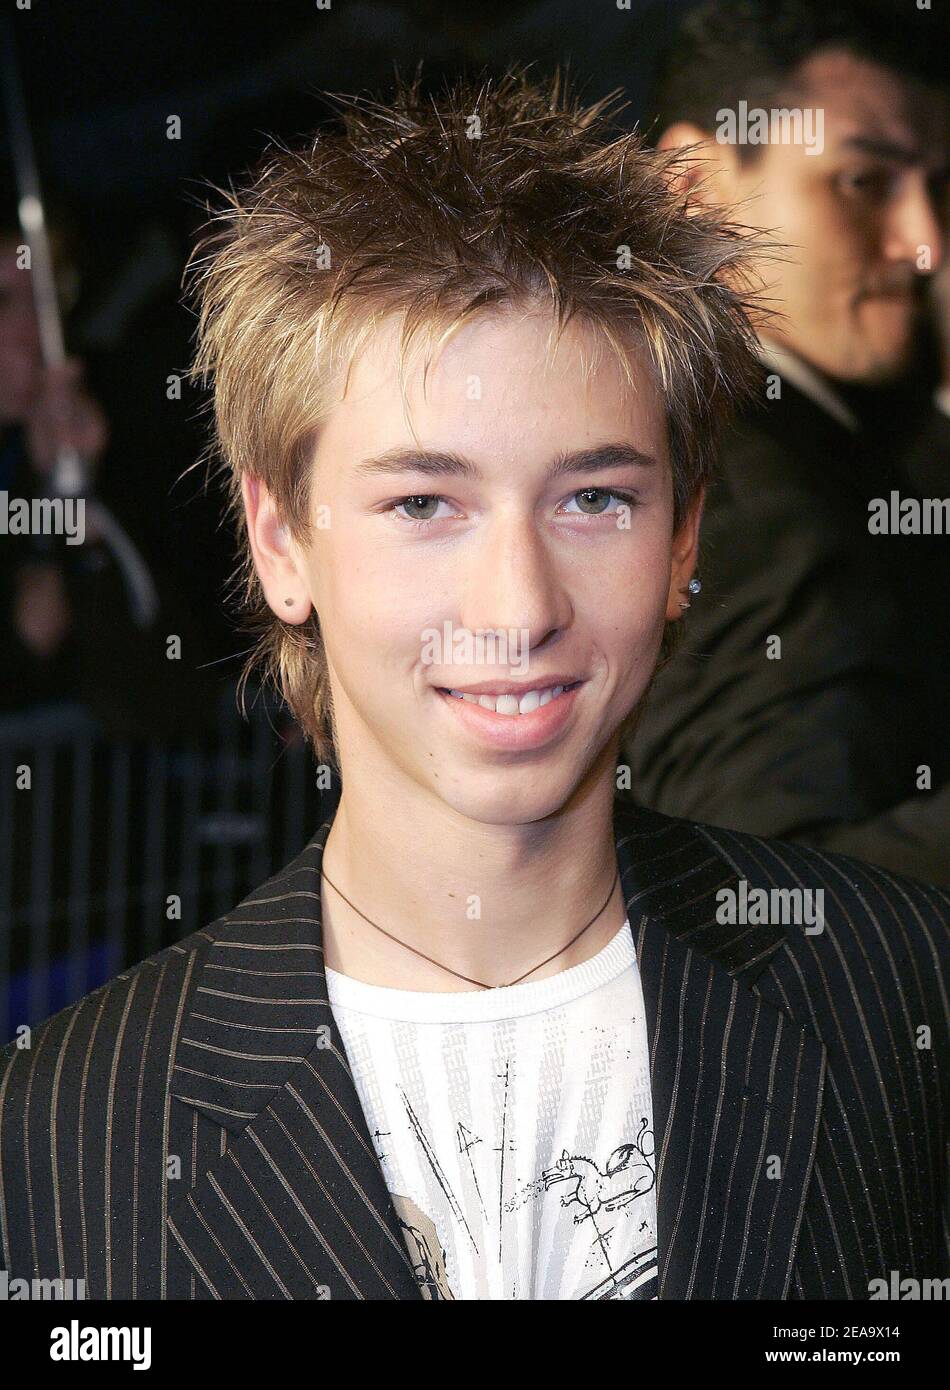 French singer Jordy attends the French NRJ cine awards held at Le Grand Rex in Paris, France on September 30, 2005. Photo by Laurent Zabulon/ABACAPRESS.COM Stock Photo